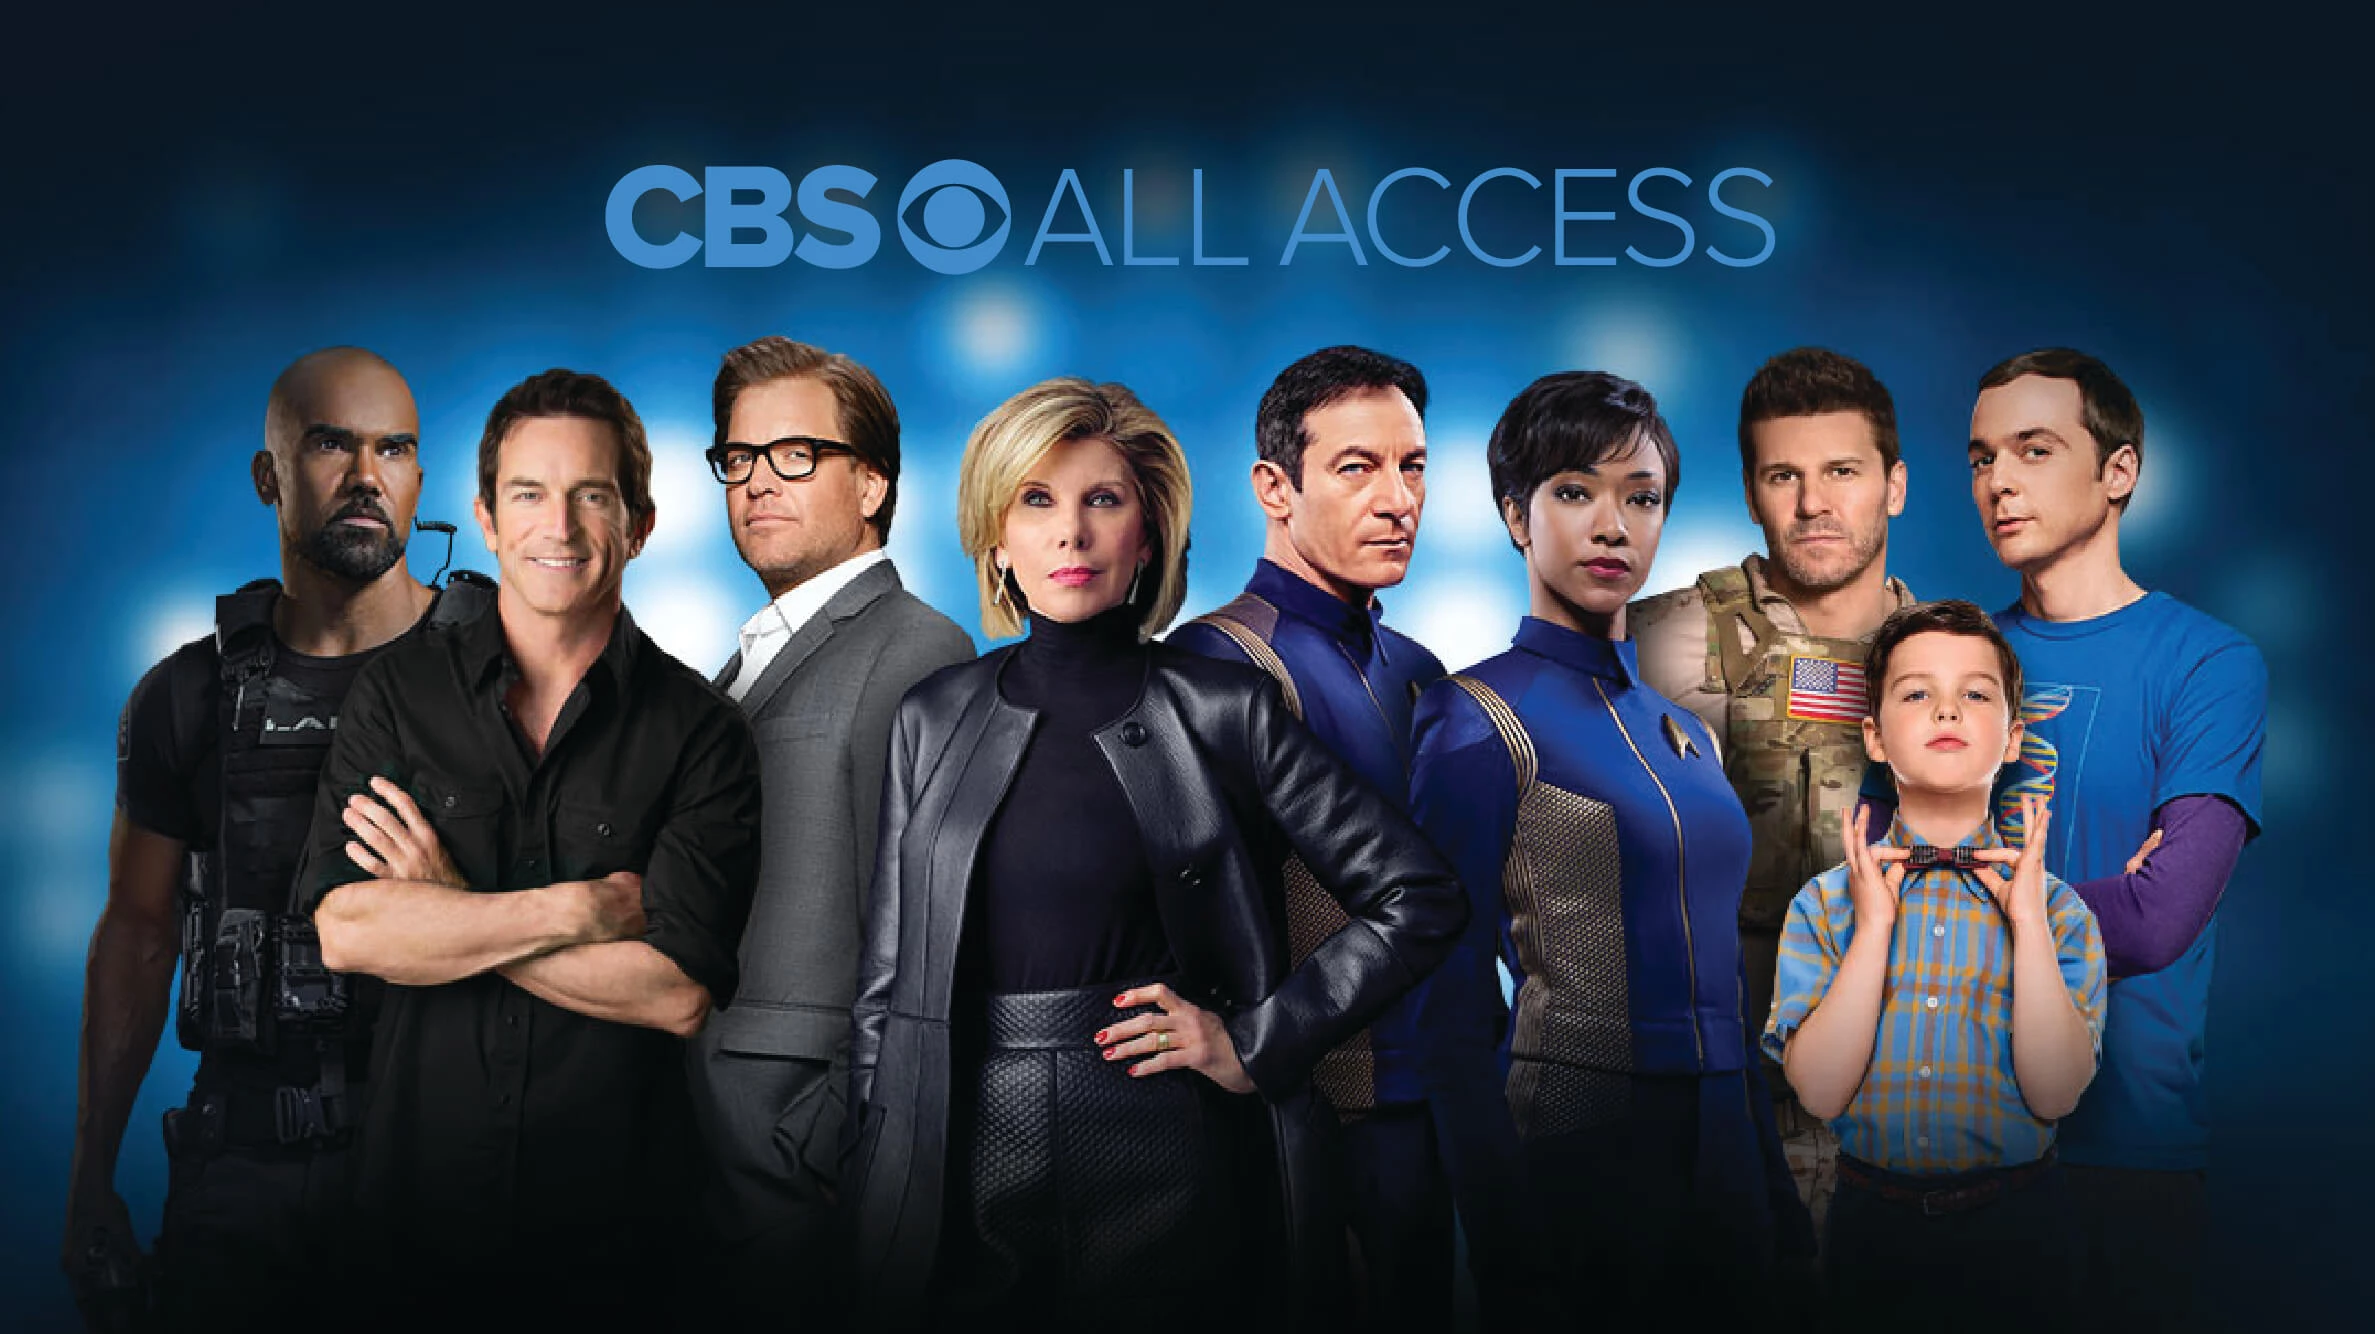 What is cbs all access